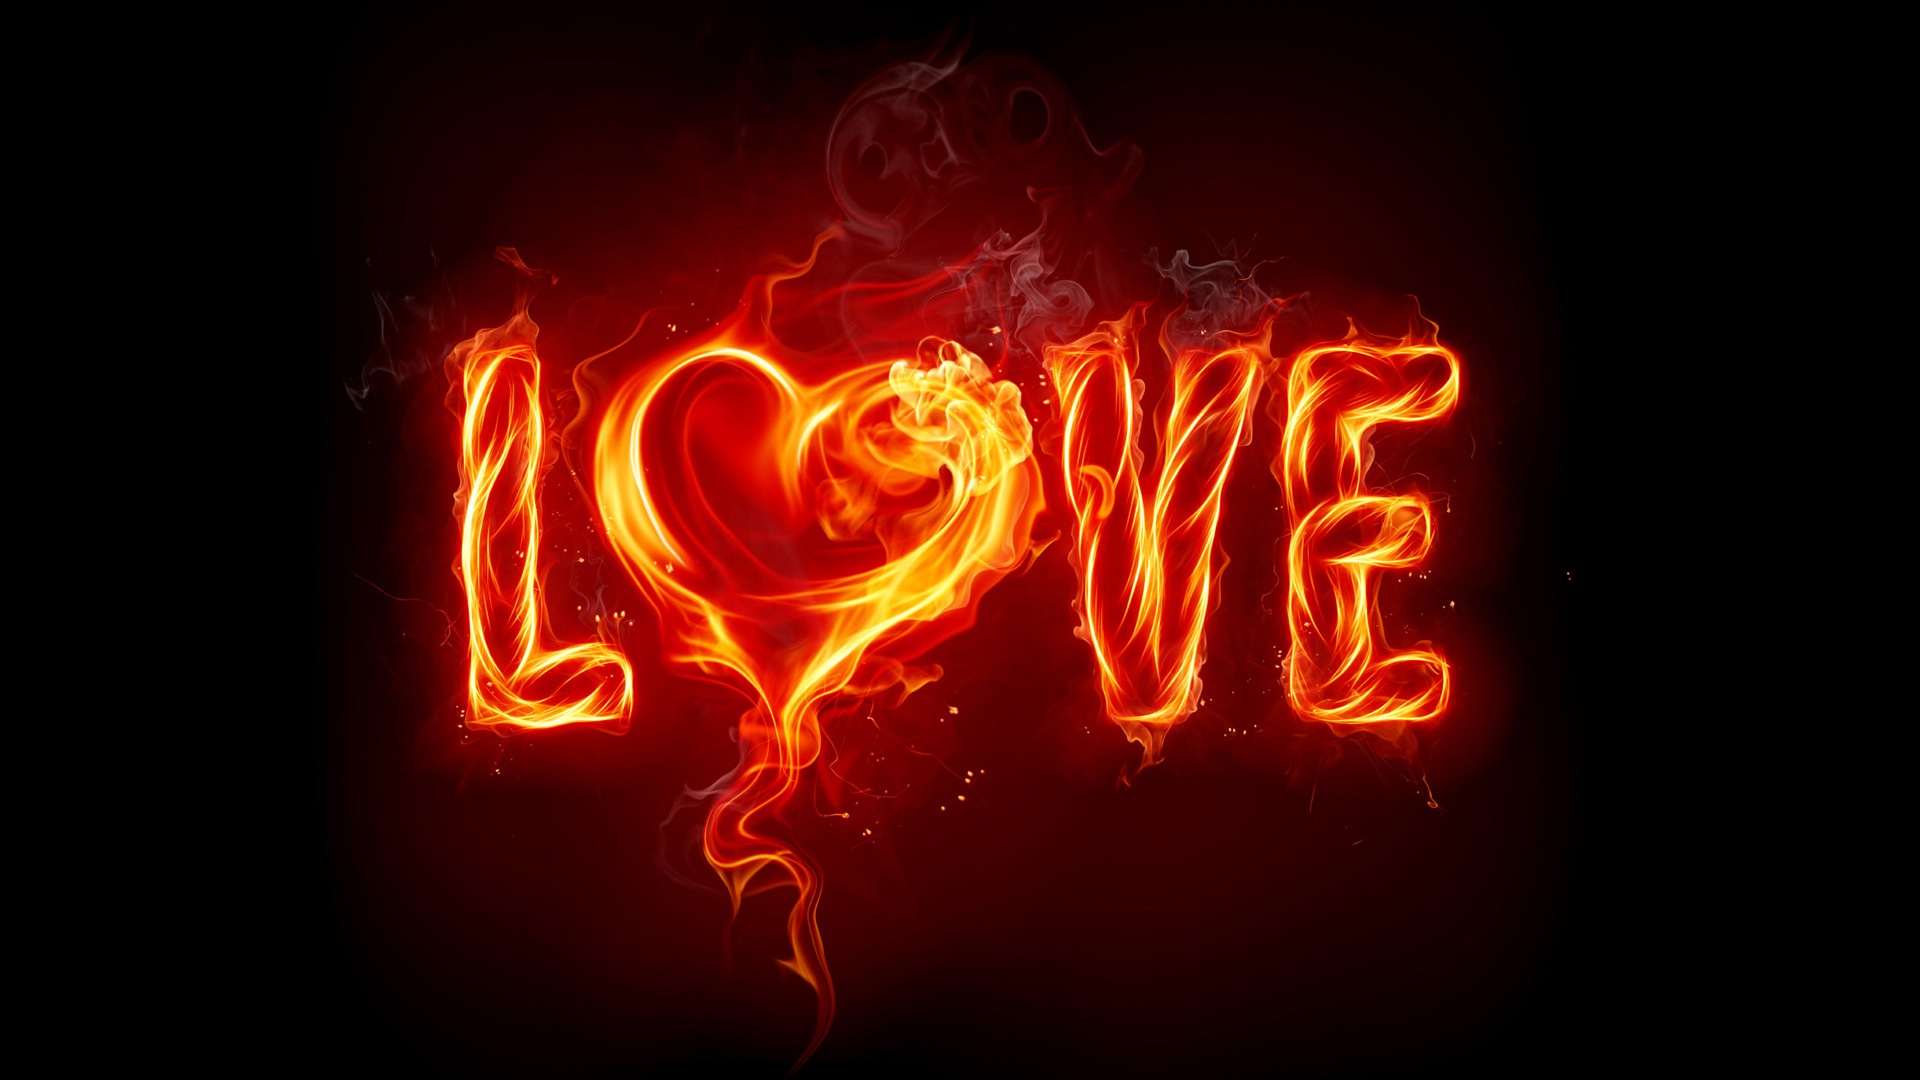 Hot Love 1920x1080 HD Image Abstract 3D